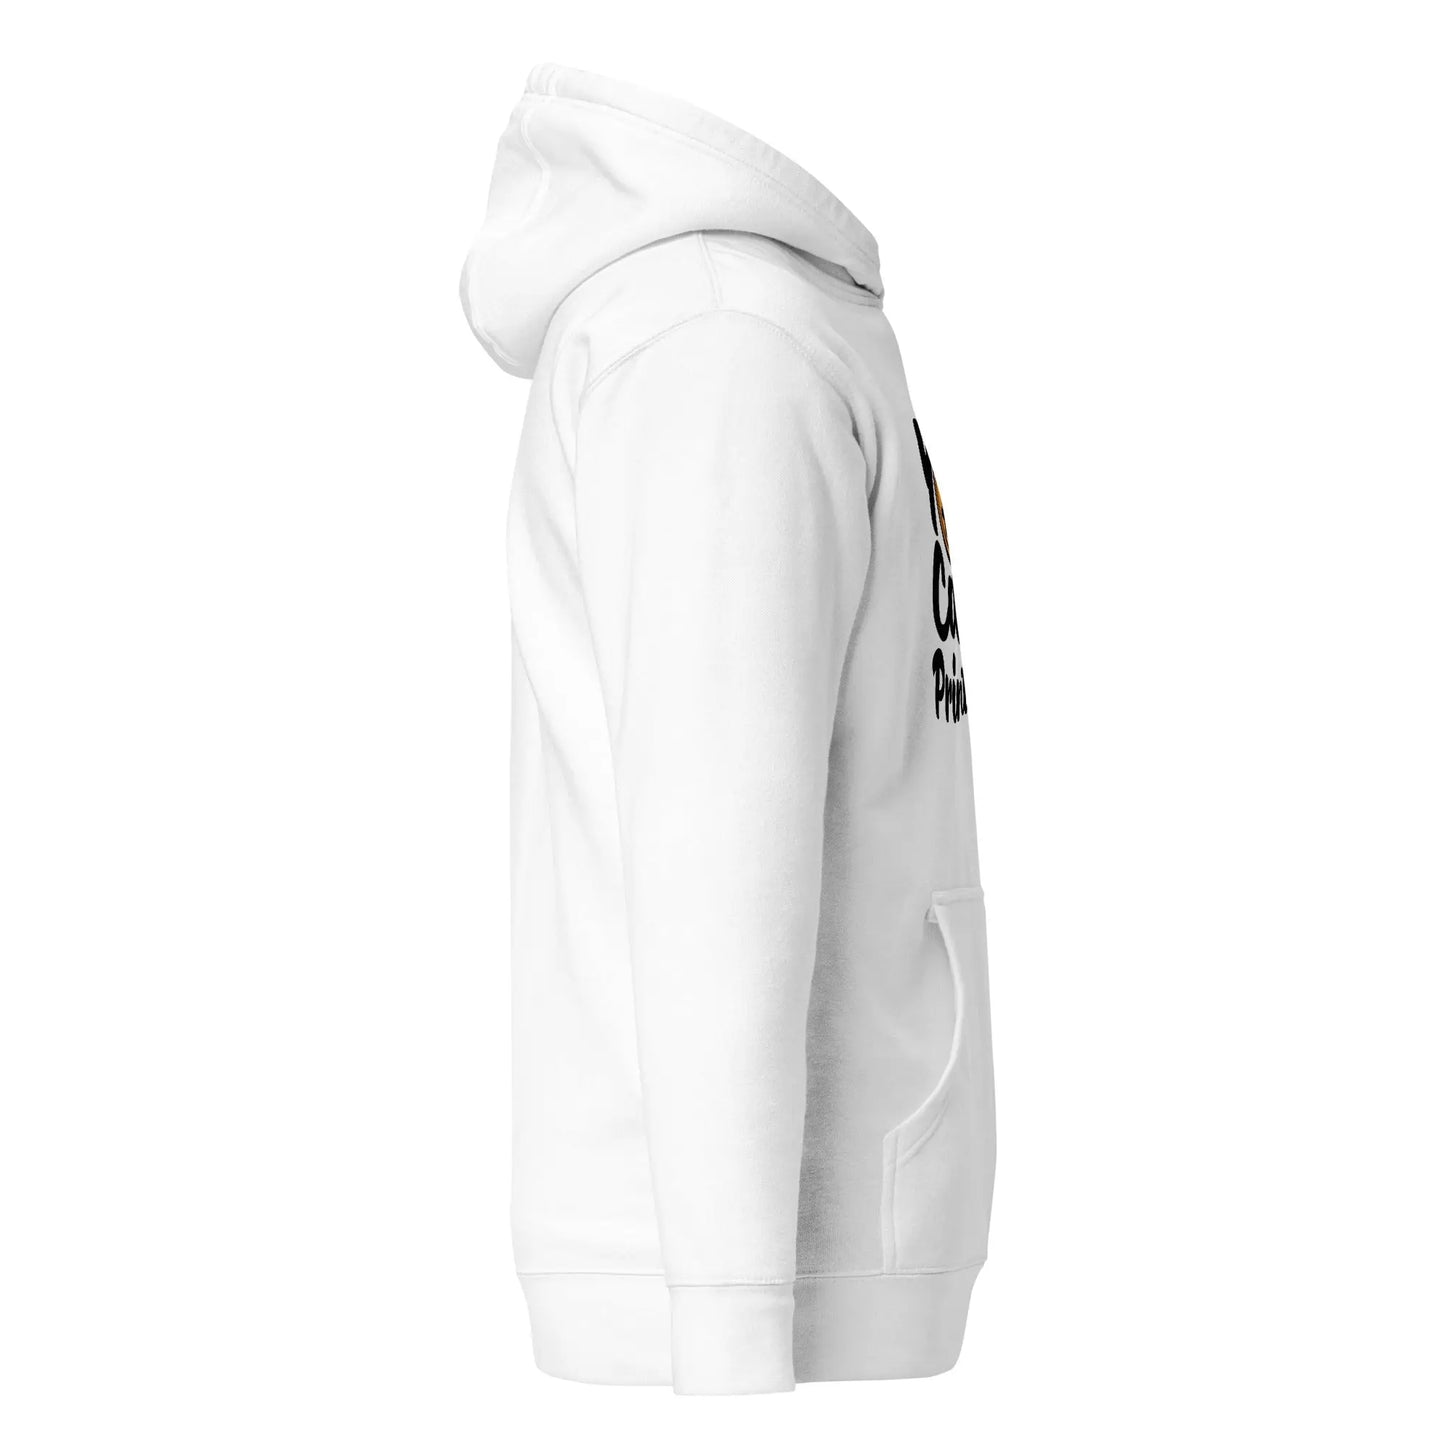 You Can`t Print Me - Premium Unisex Bitcoin Hoodie Store of Value